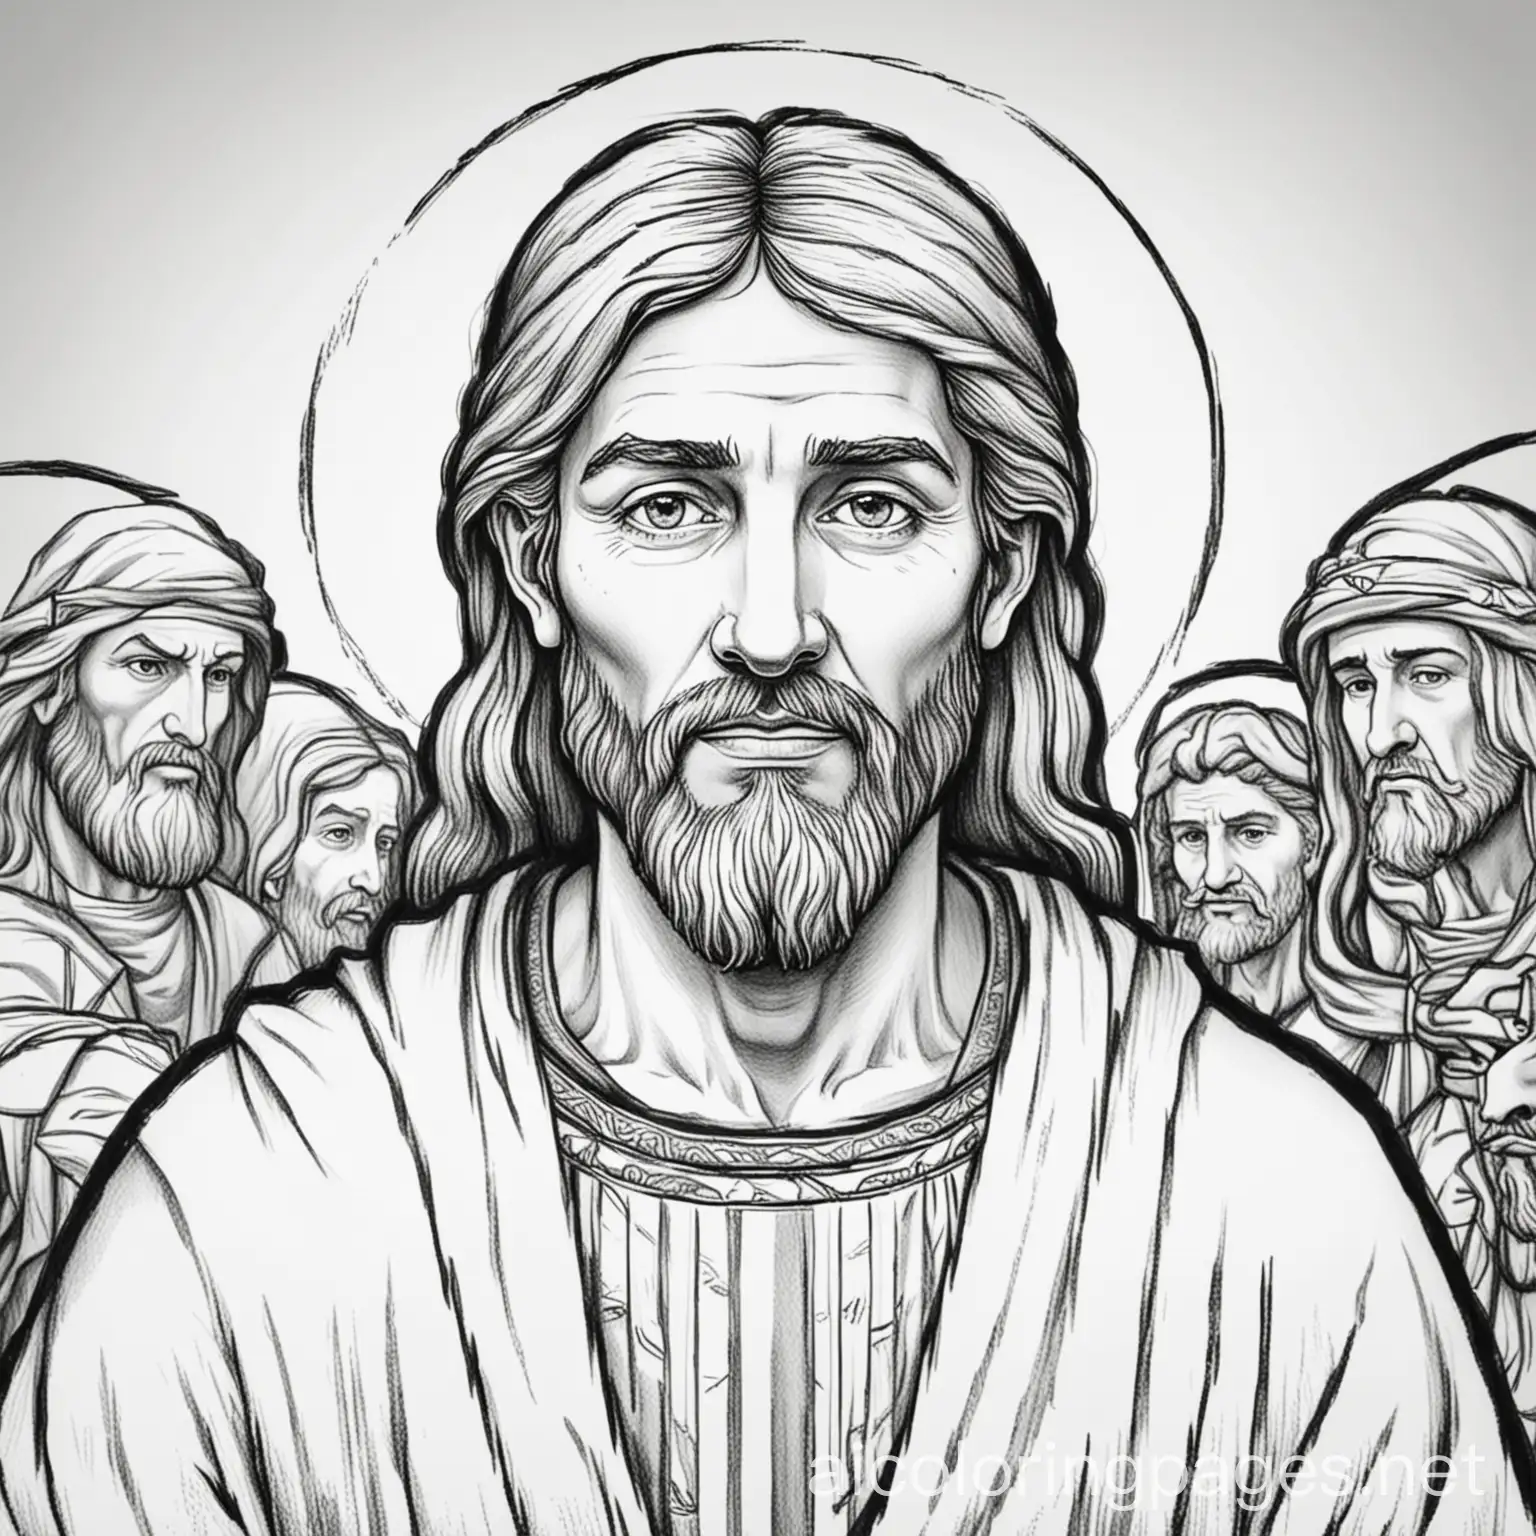 Simon the disciple of Jesus of the bible black and white coloring page, Coloring Page, black and white, line art, white background, Simplicity, Ample White Space. The background of the coloring page is plain white to make it easy for young children to color within the lines. The outlines of all the subjects are easy to distinguish, making it simple for kids to color without too much difficulty